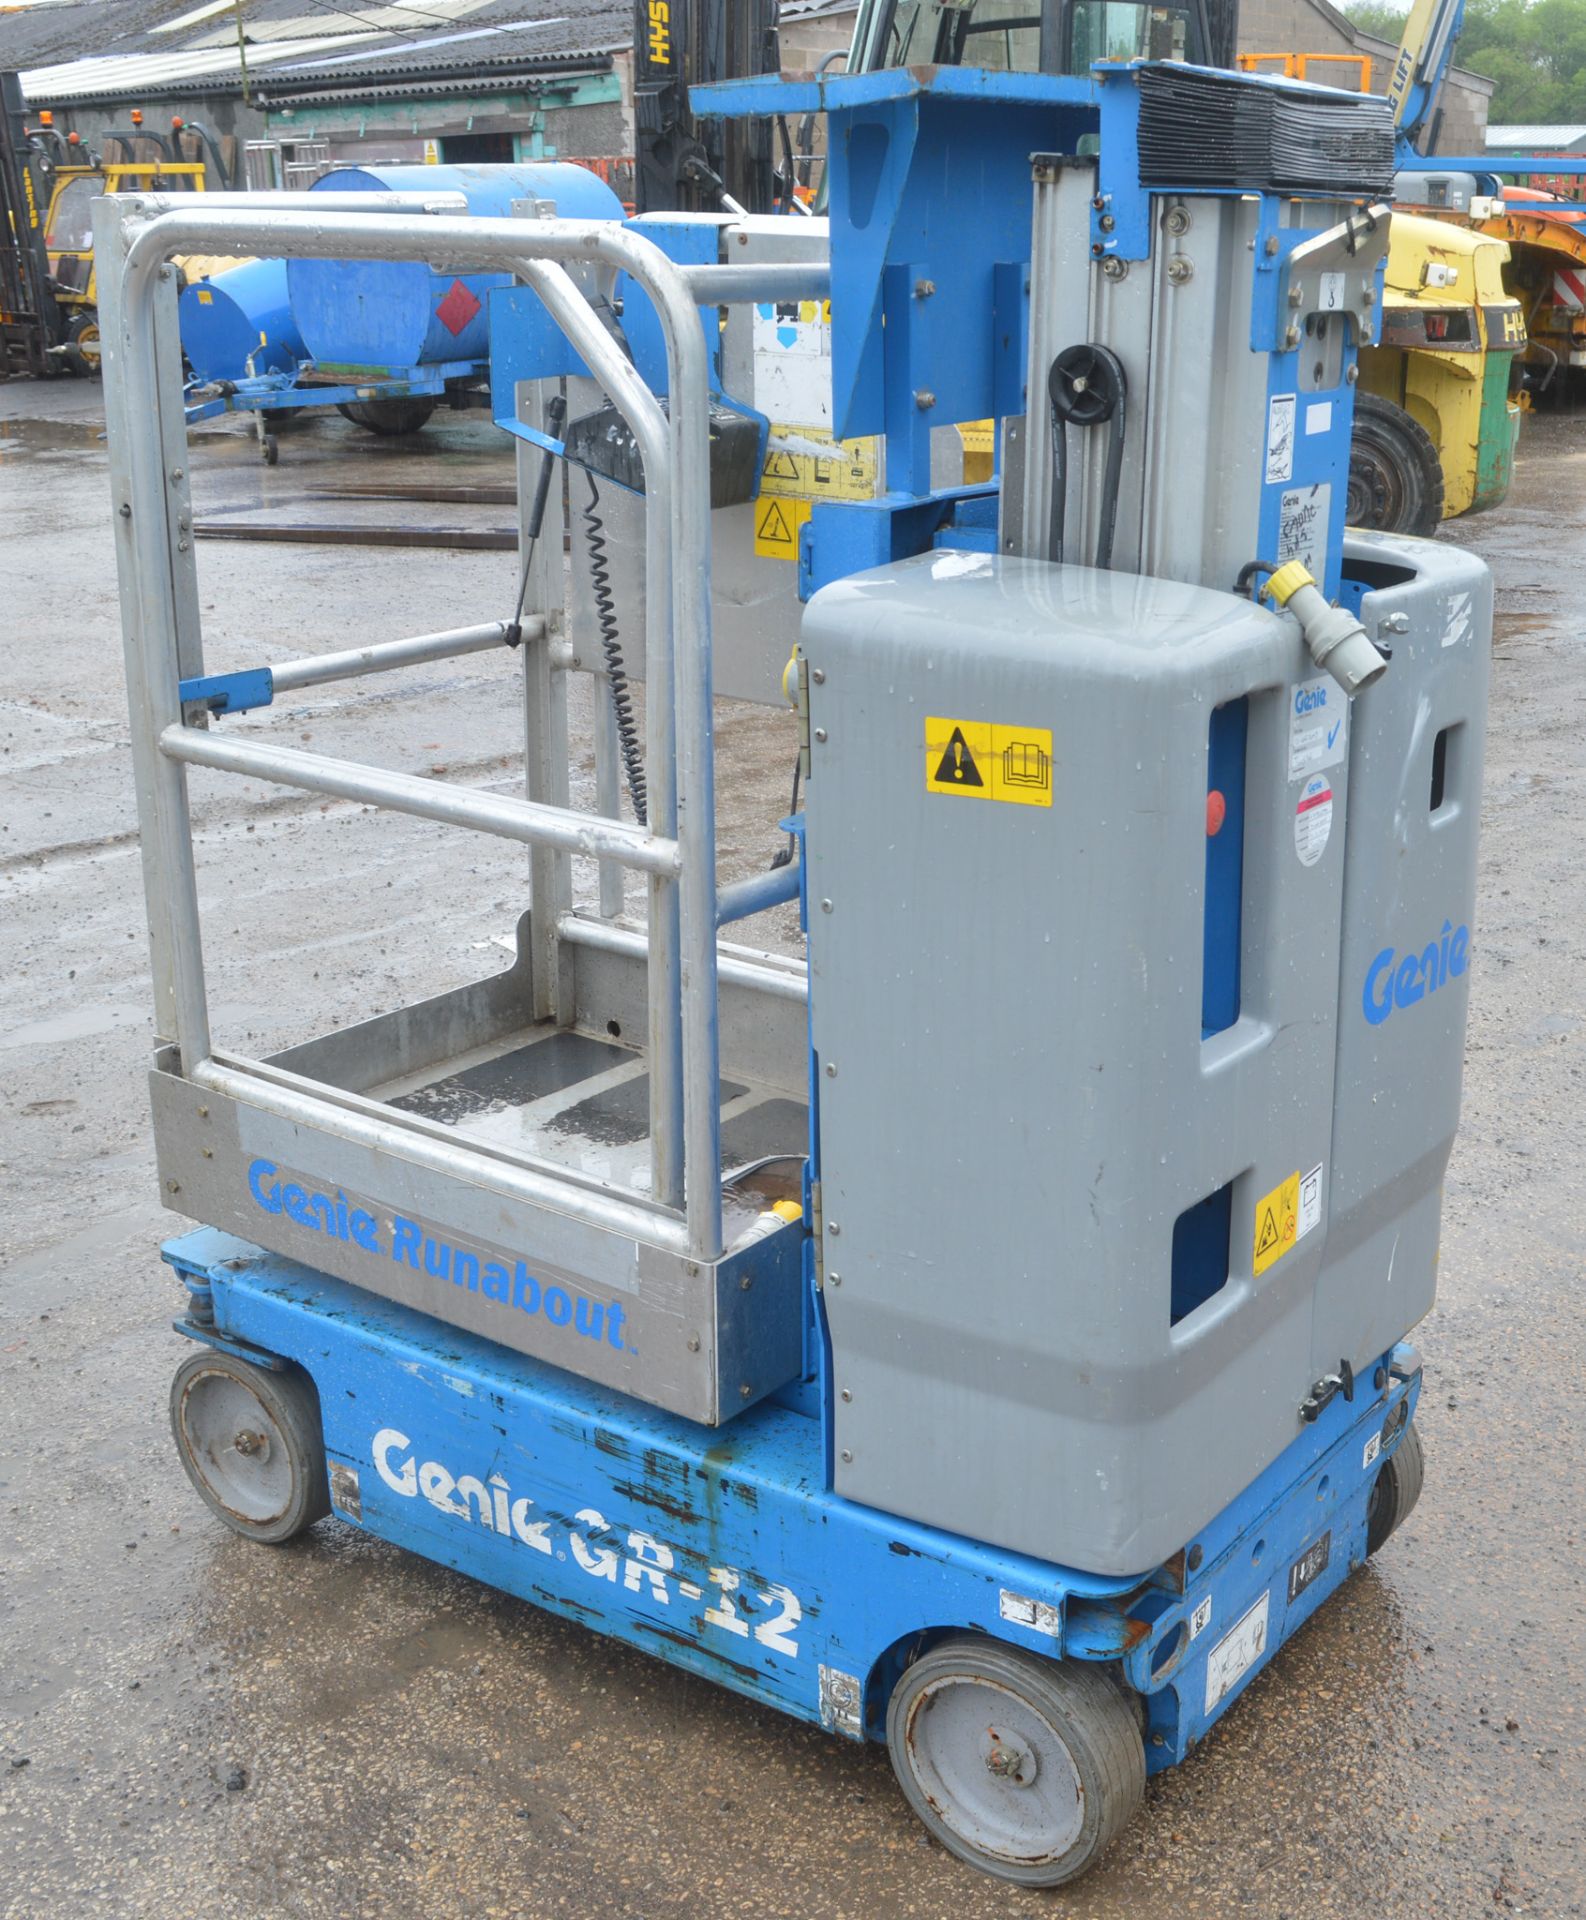 Genie Runabout GR-12 battery electric scissor lift  Year: 2013 S/N: 26579 A608642 - Image 2 of 9